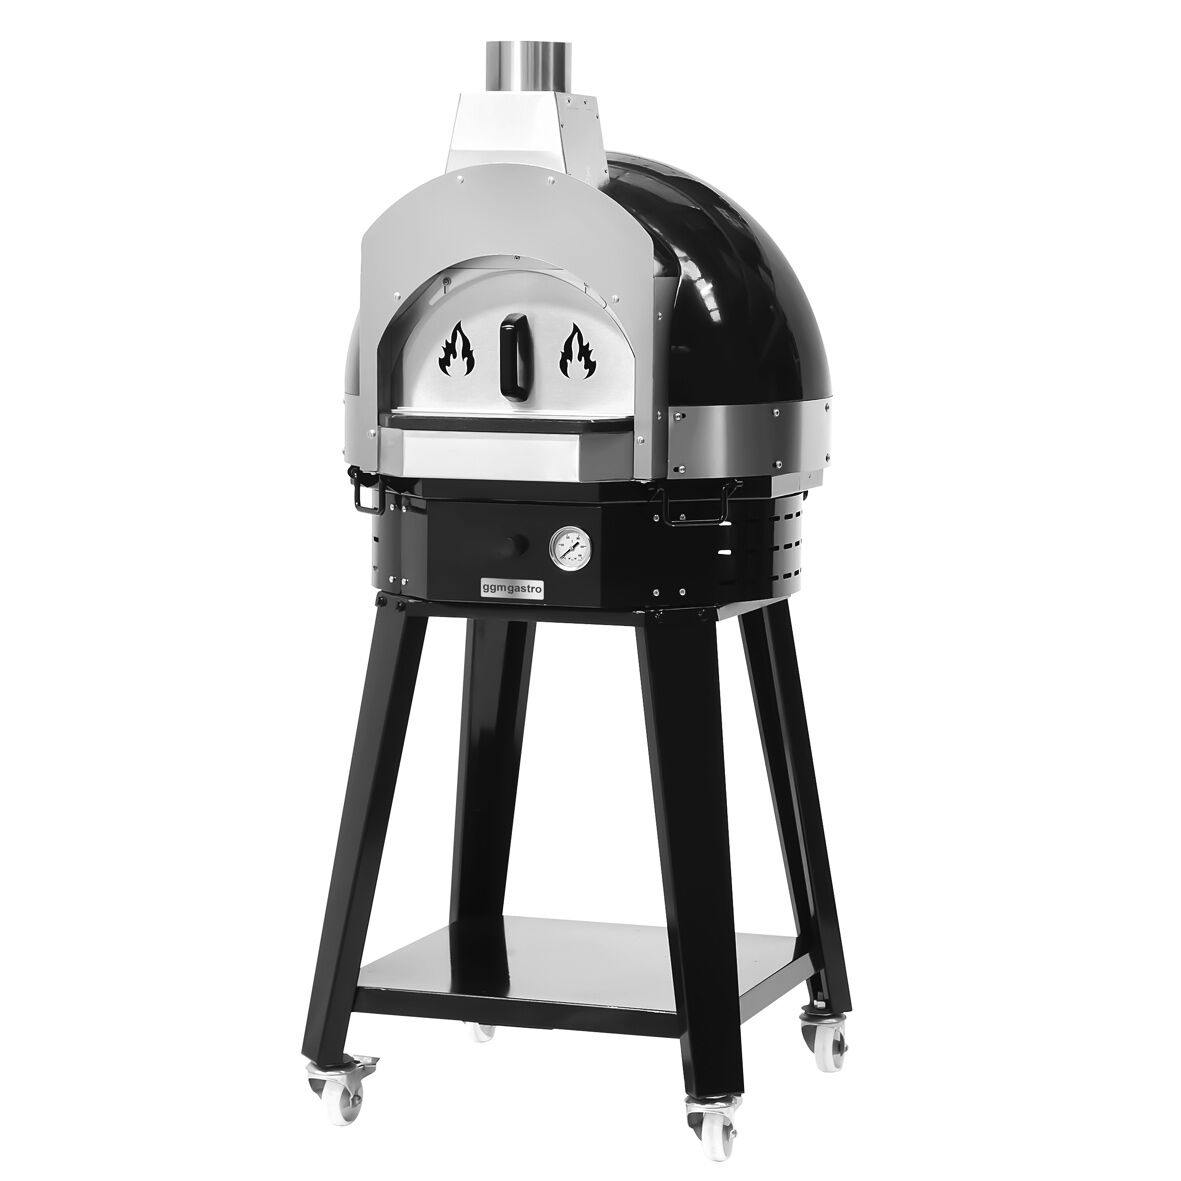 Wooden Pizza Oven Black - incl. base - height: 0.83 m	